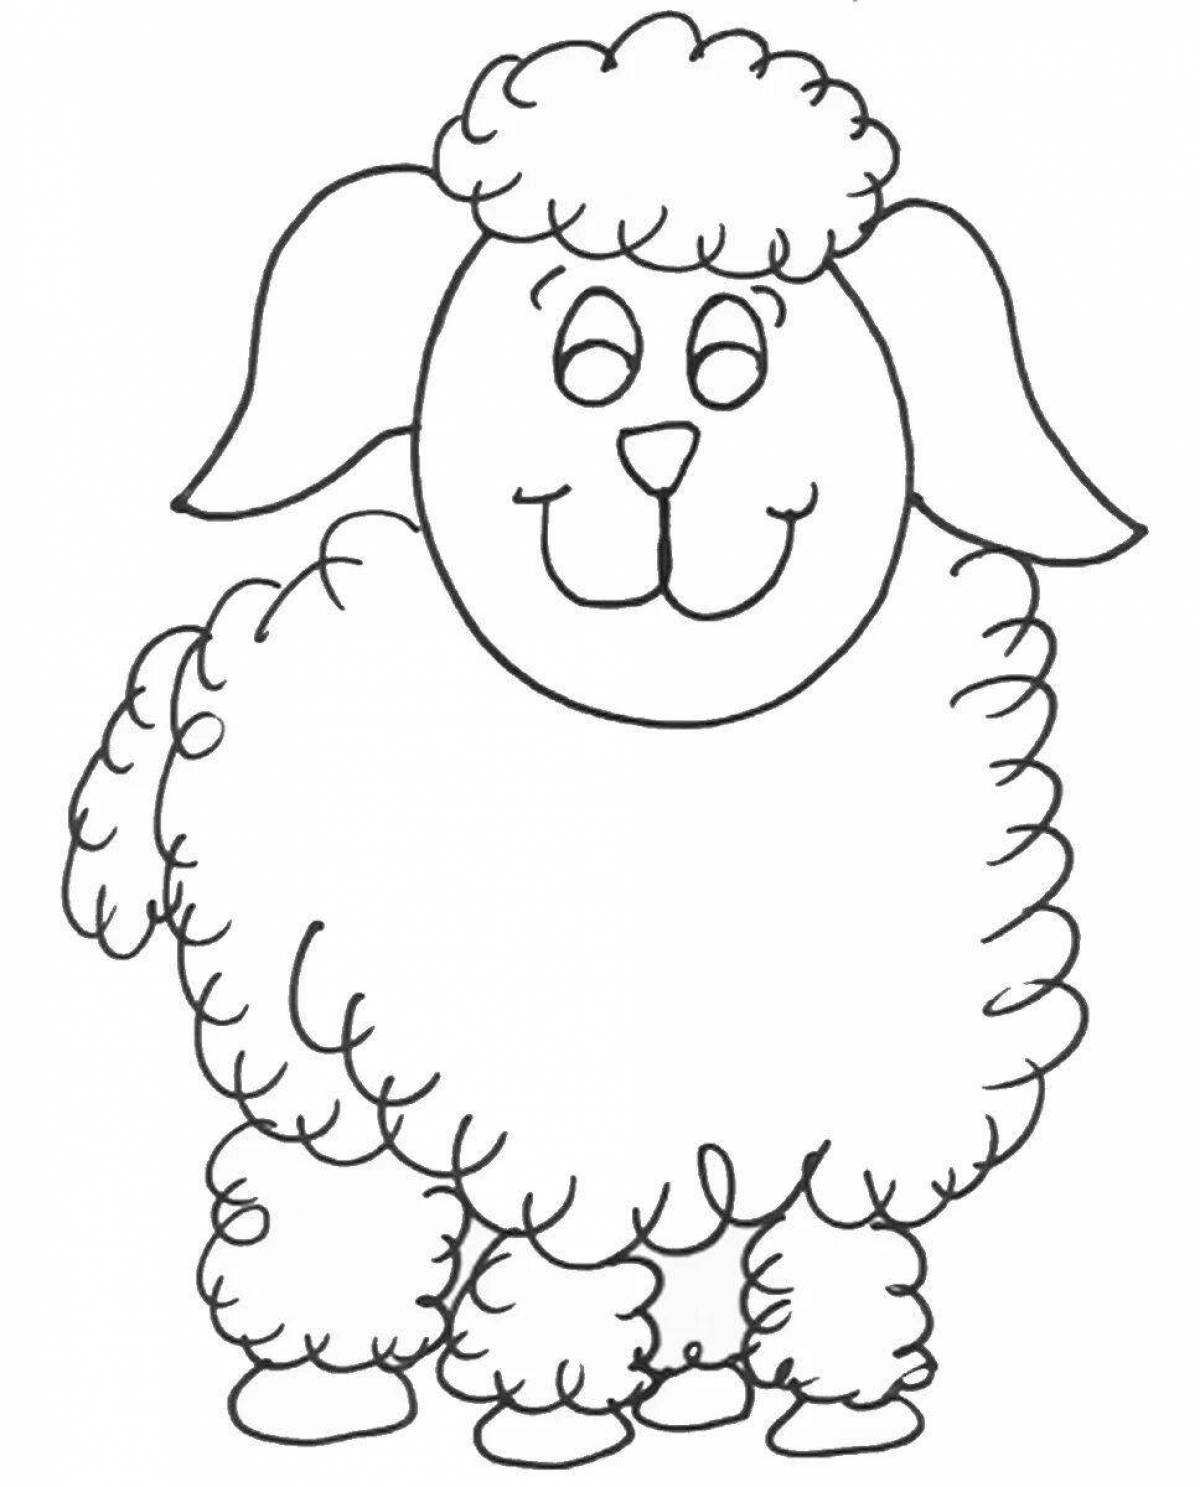 Bright sheep coloring book for children 2-3 years old